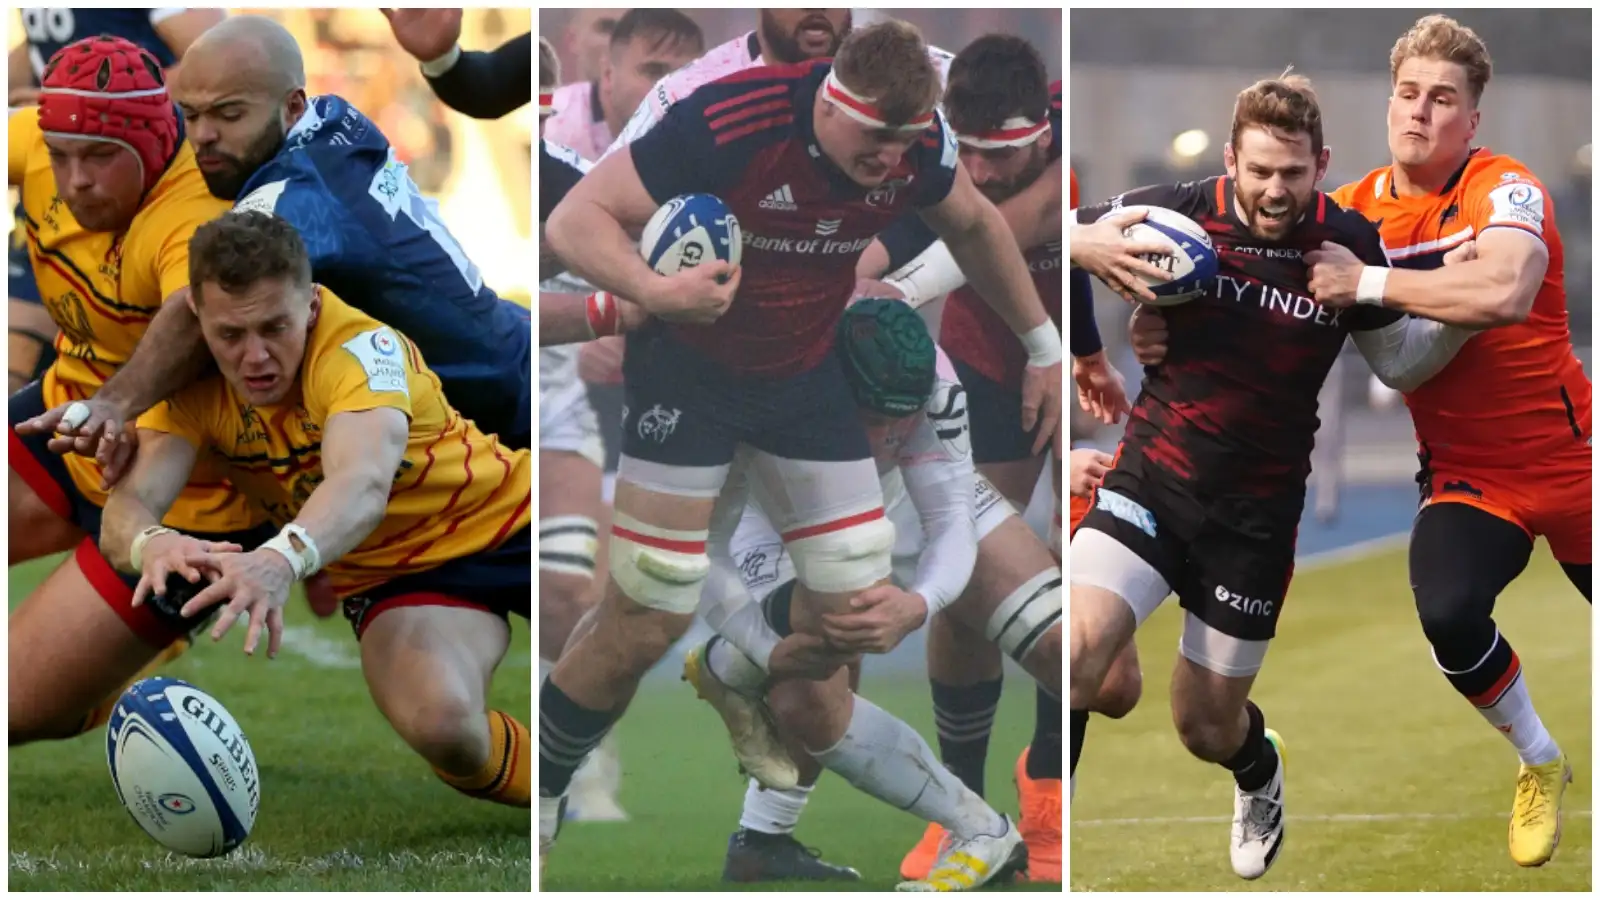 Champions Cup: Five key games that will play a significant role in qualification and seedings